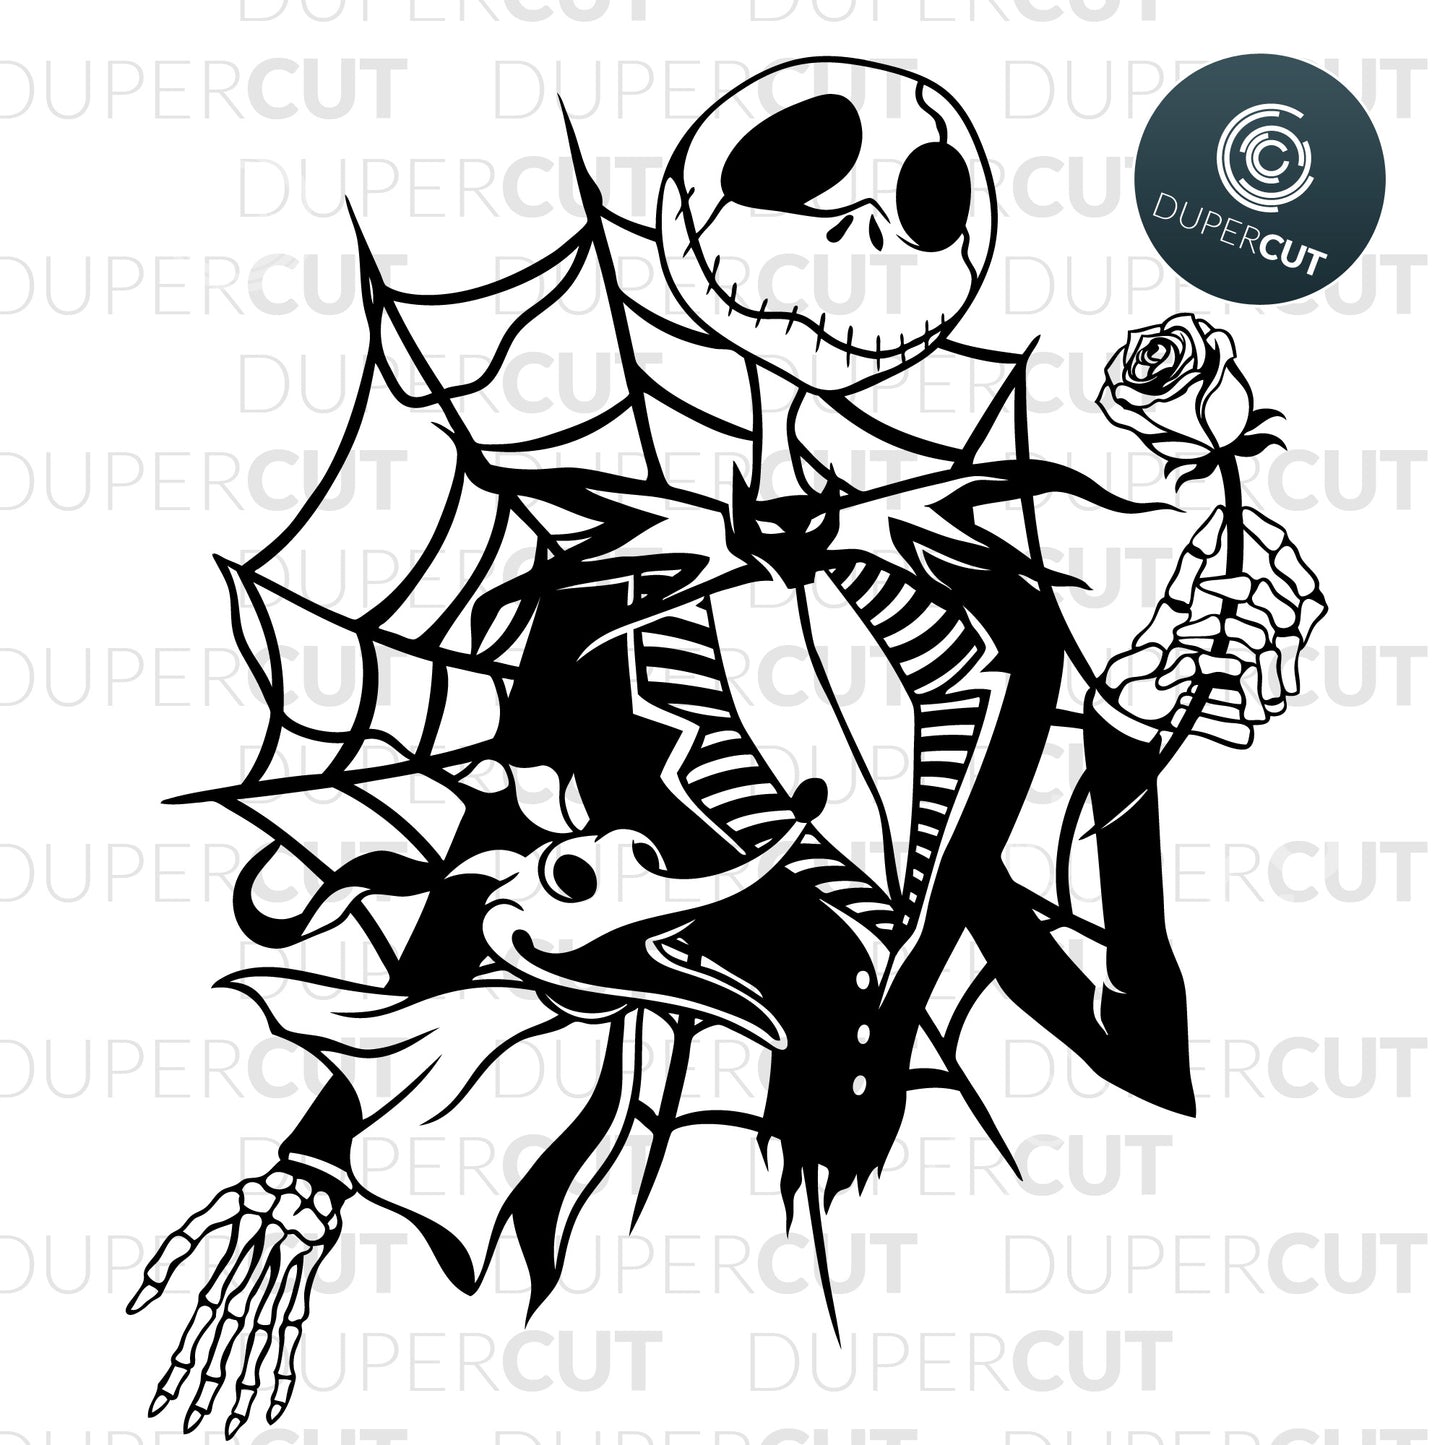 Jack Skellington holding a rose, black and white drawing. Papercutting template for commercial use. SVG files for Silhouette Cameo, Cricut, Glowforge, DXF for CNC, laser cutting, print on demand